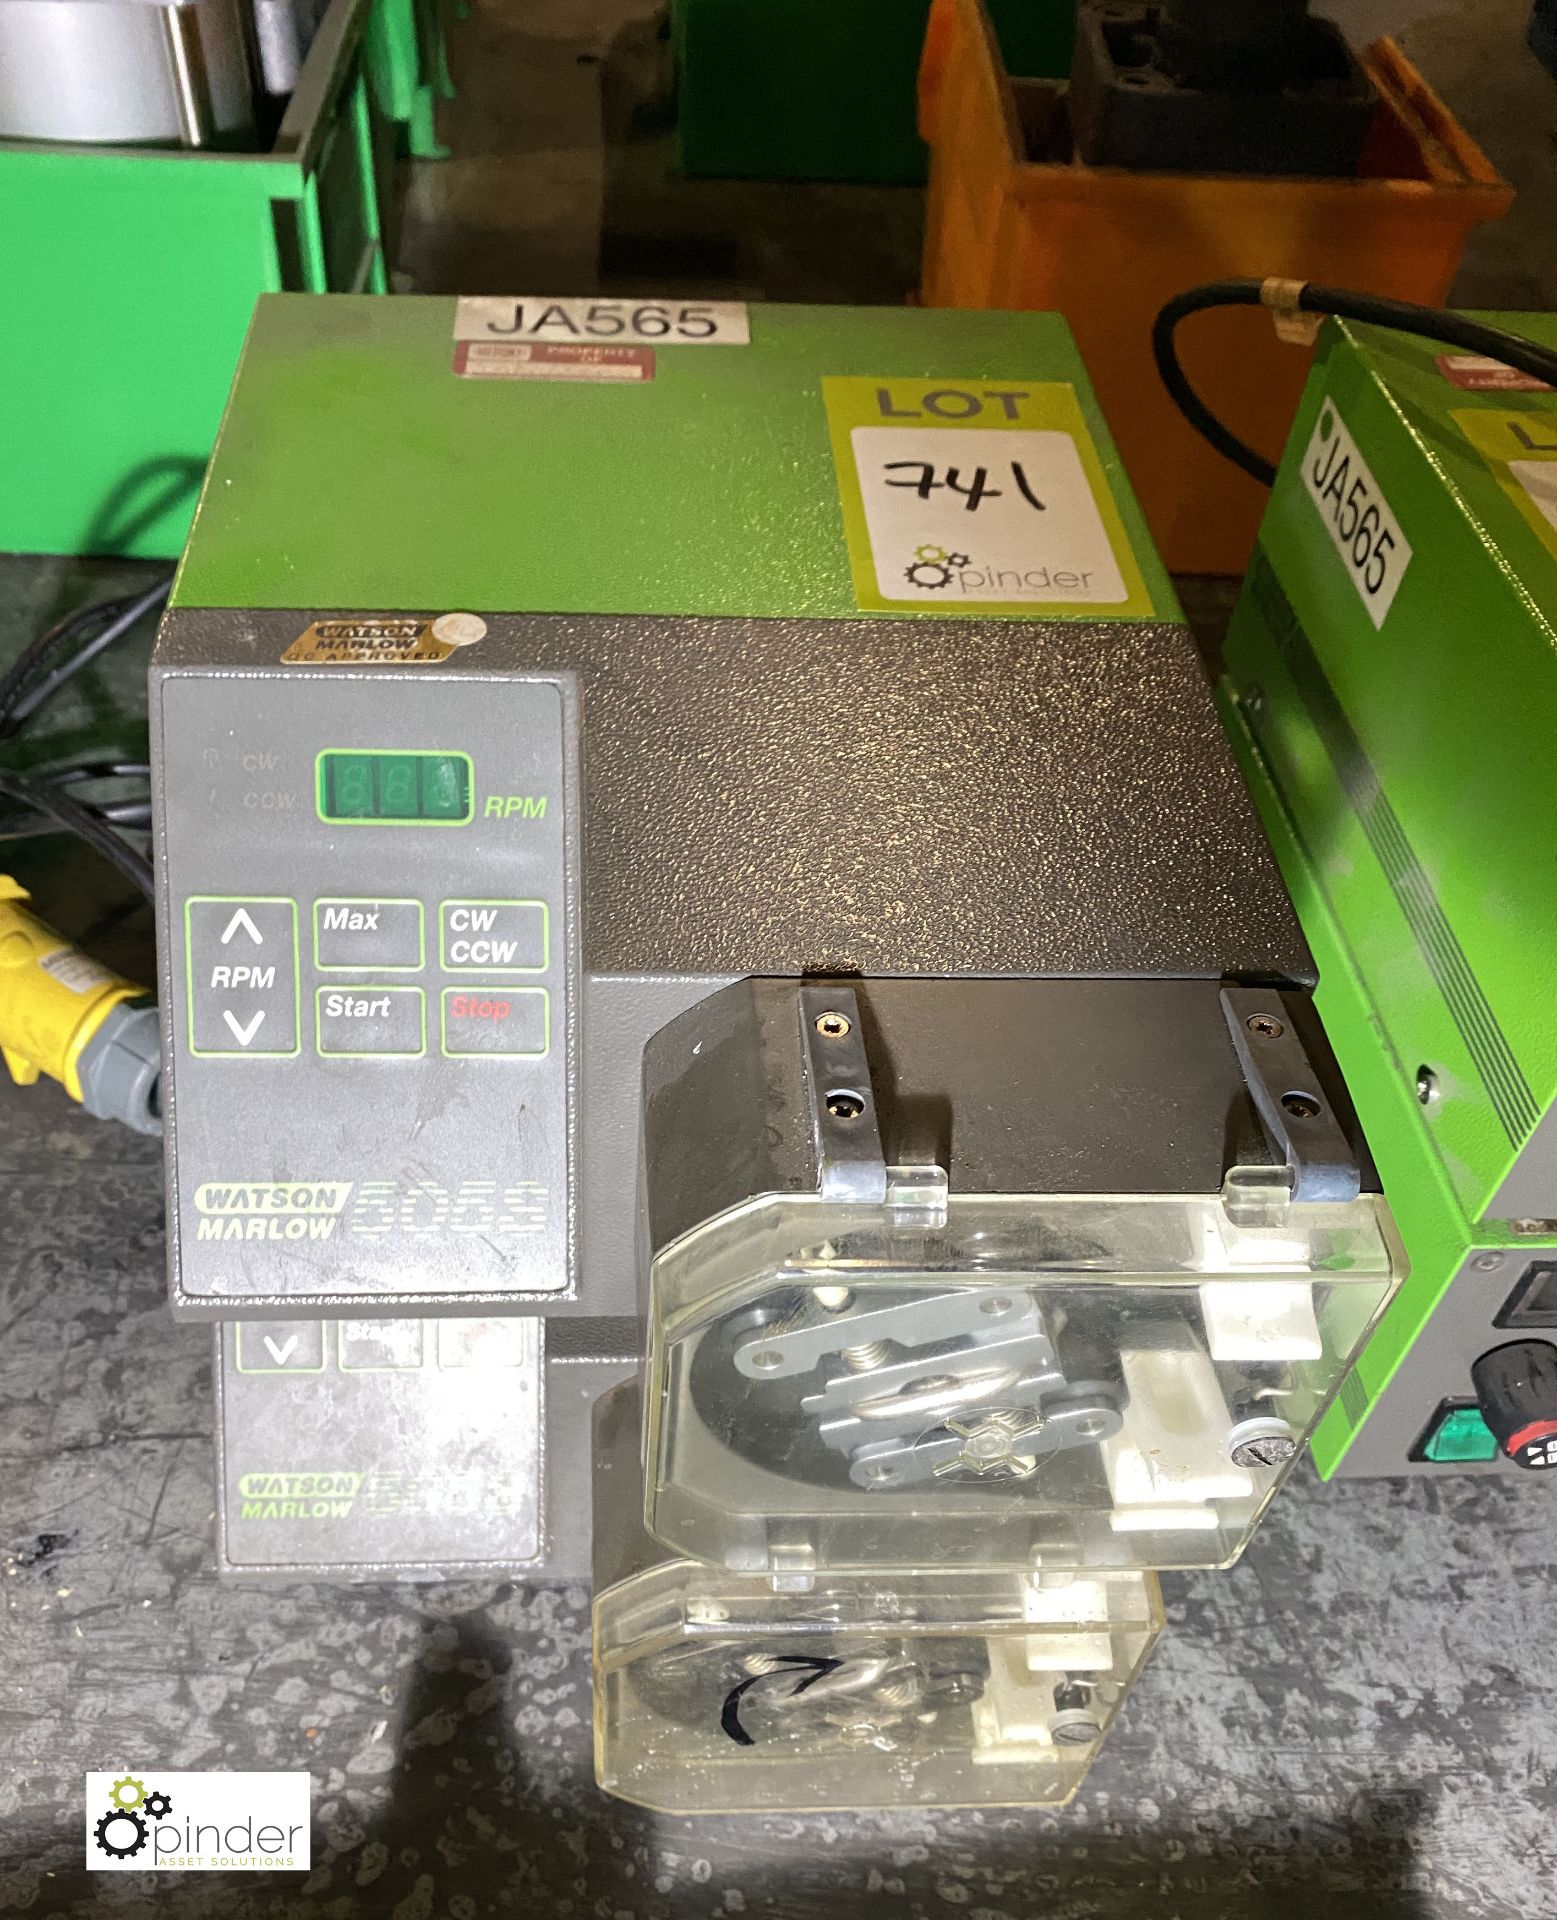 2 Watson Marlow 505S Peristaltic Pumps (please note there is a lift out fee of £5 plus VAT on this